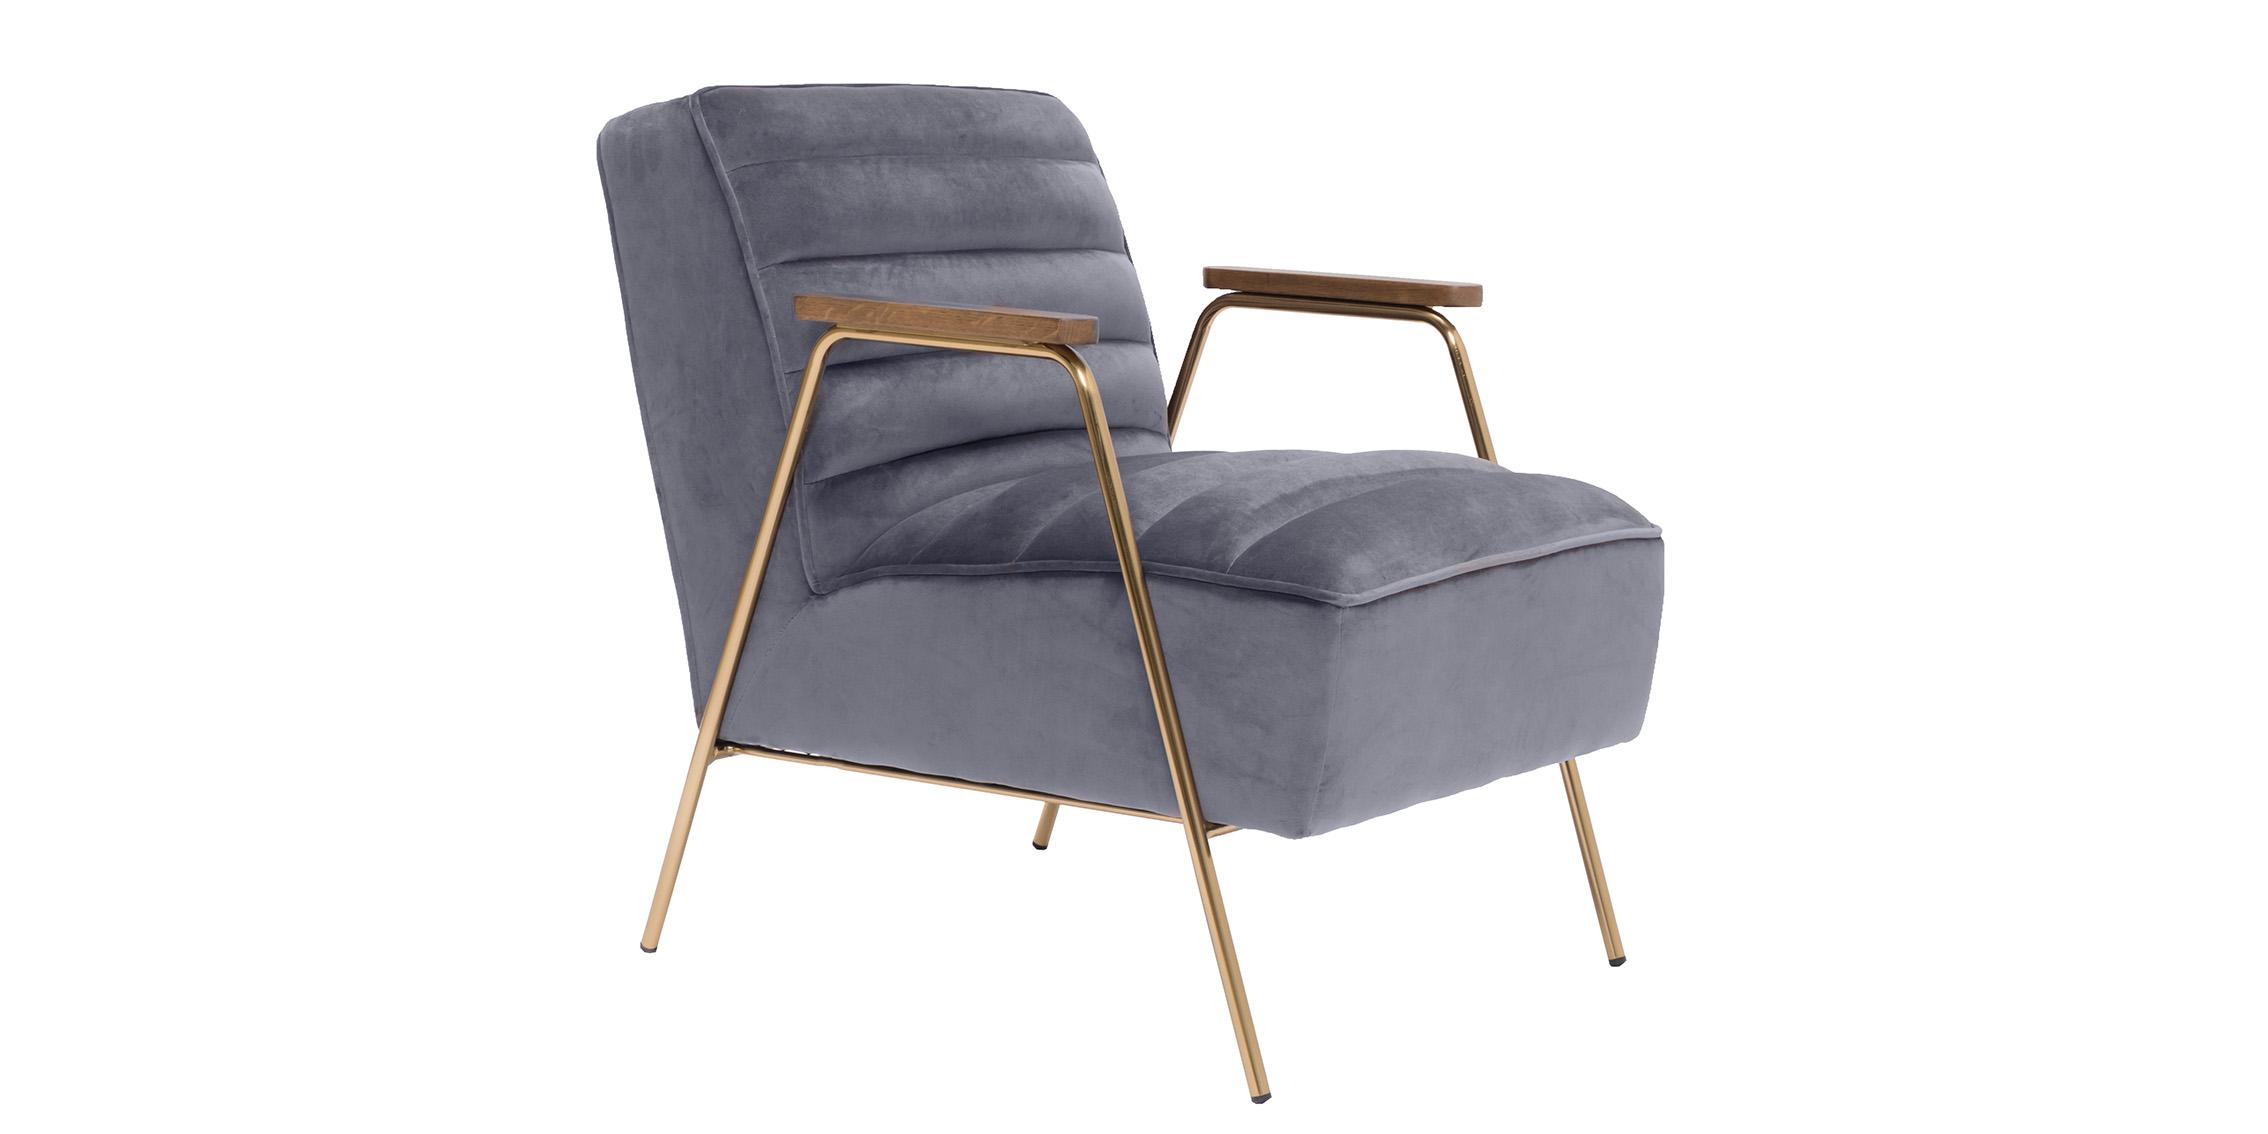 Contemporary, Modern Accent Chair WOODFORD 521Grey 521Grey in Gray, Gold Fabric